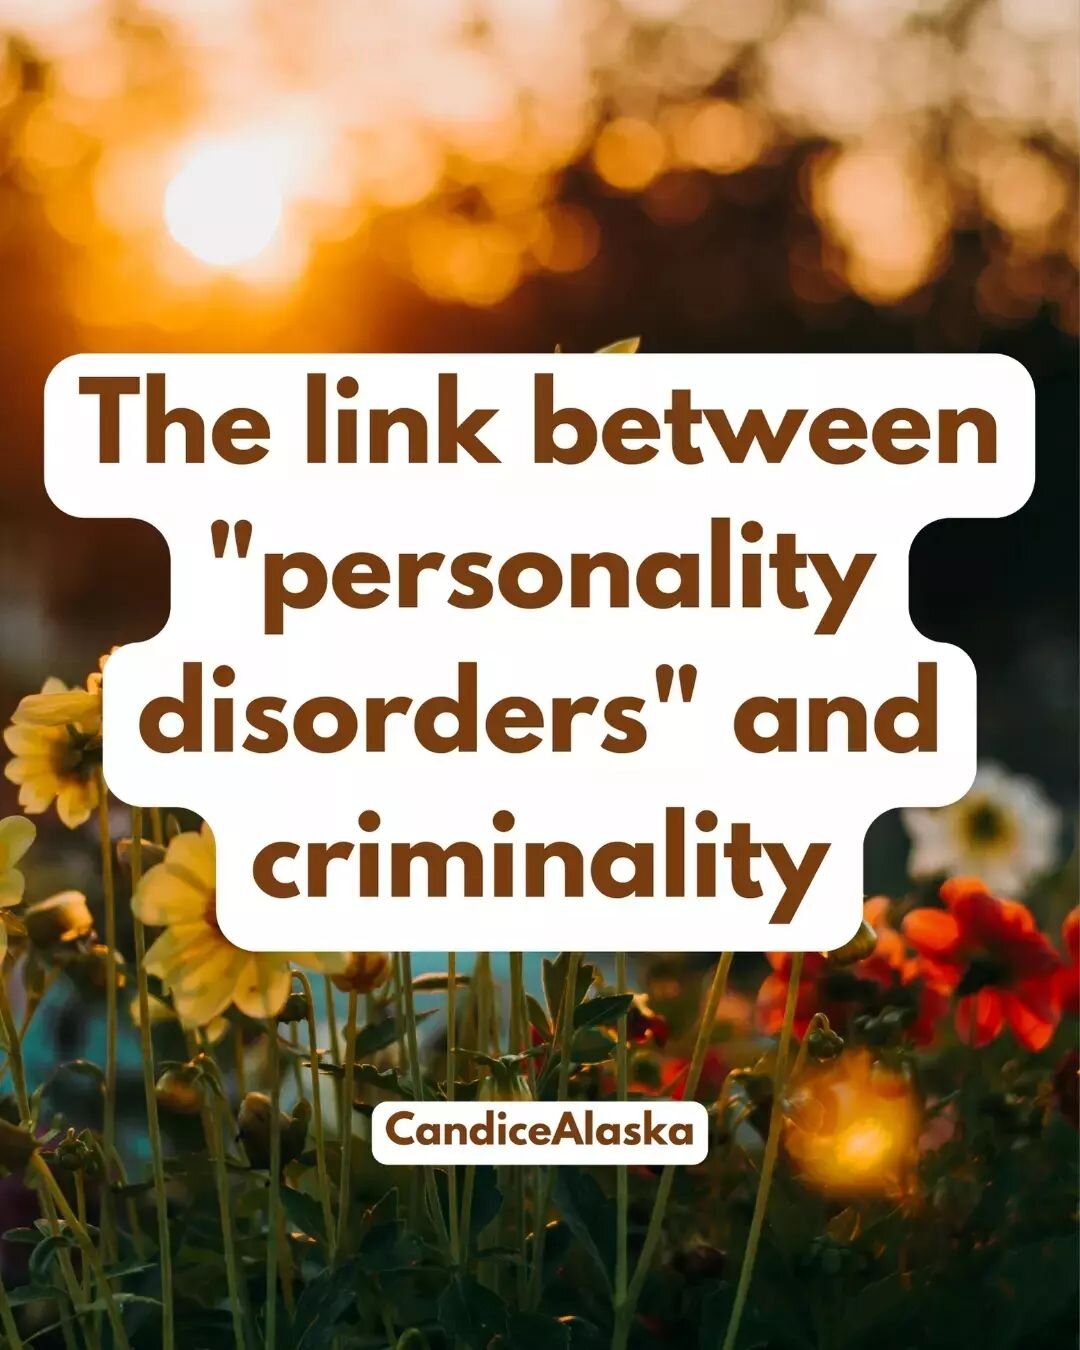 CWs sanism, ab*se mentions. 

The first of an ongoing series unpacking the link between &quot;personality disorders&quot; and criminality.

People with PD diagnoses are strongly correlated with causing harm, violence and even crime, especially cluste